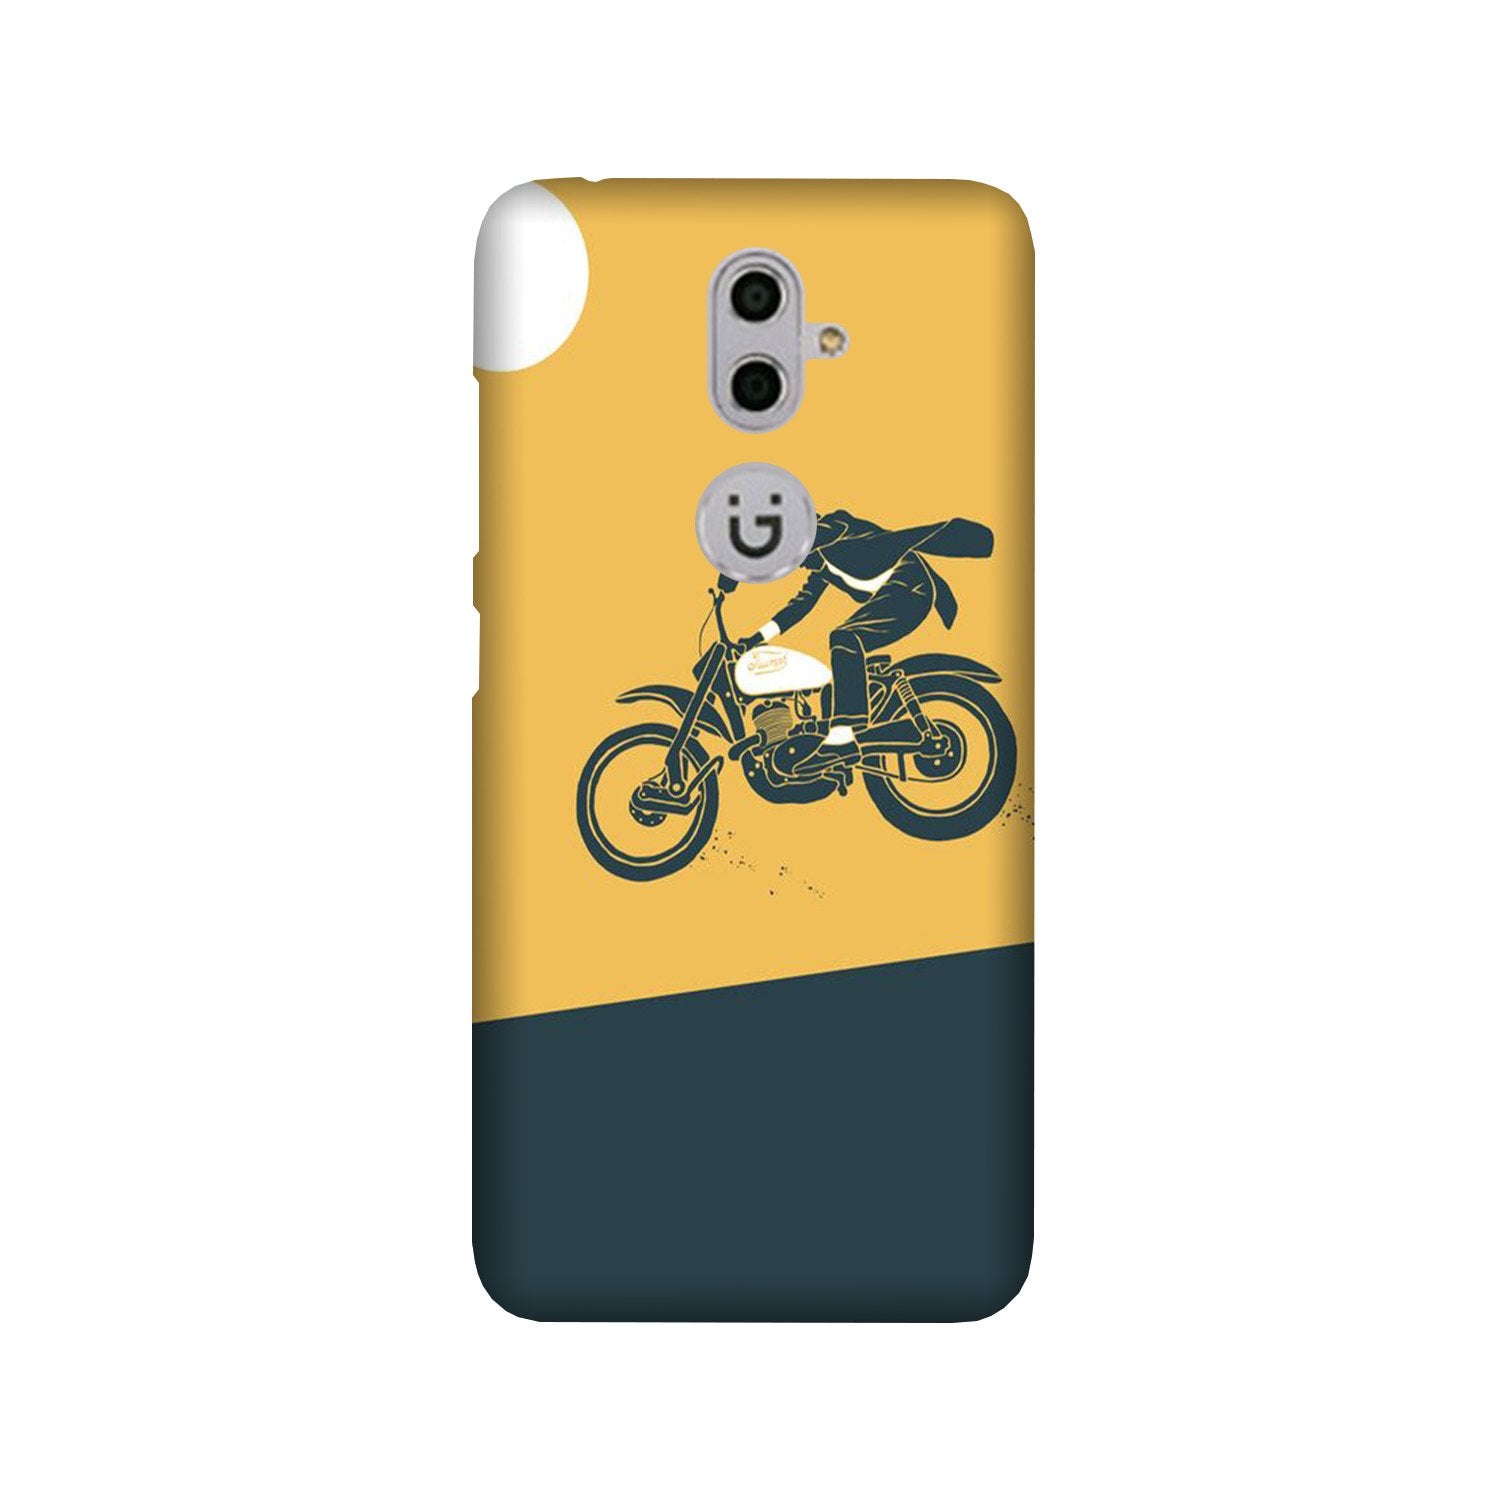 Bike Lovers Case for Gionee S9 (Design No. 256)